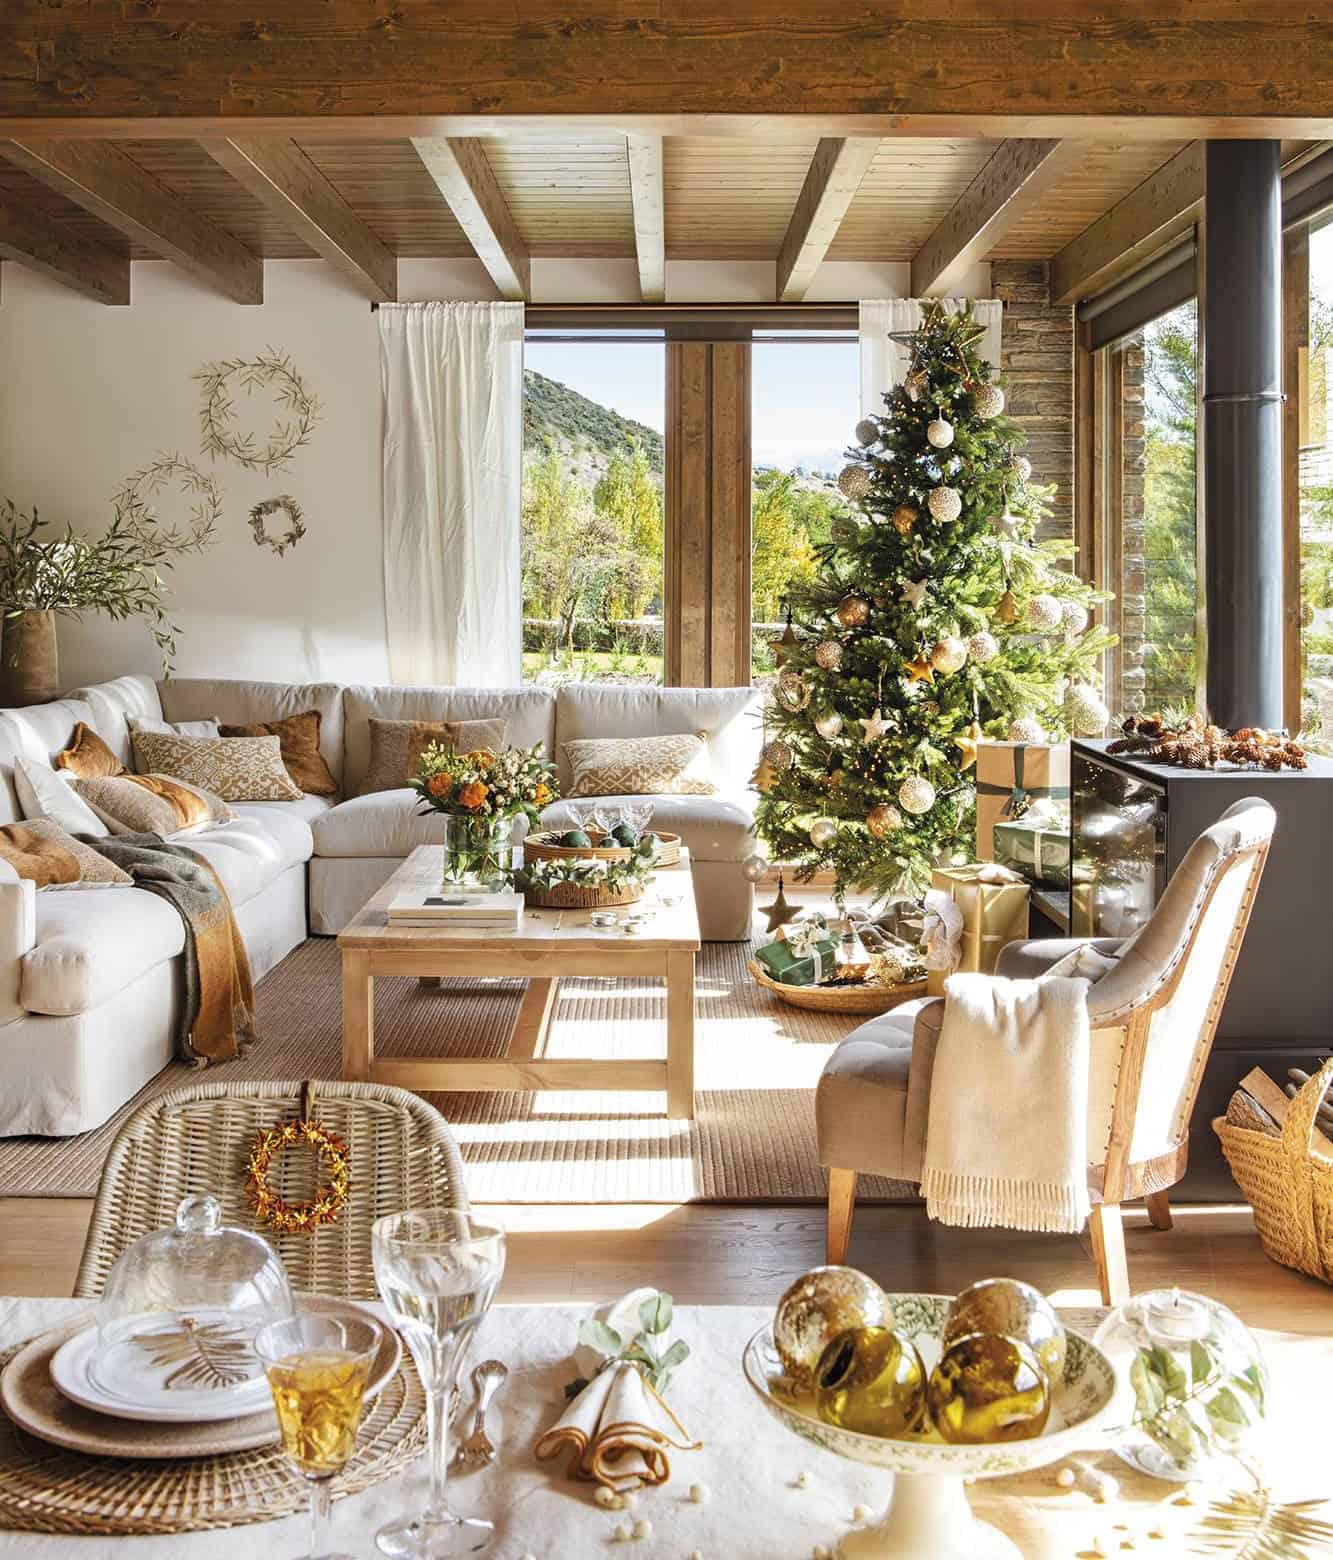 A beautiful rustic cabin celebrates Christmas in the Pyrenees Mountains